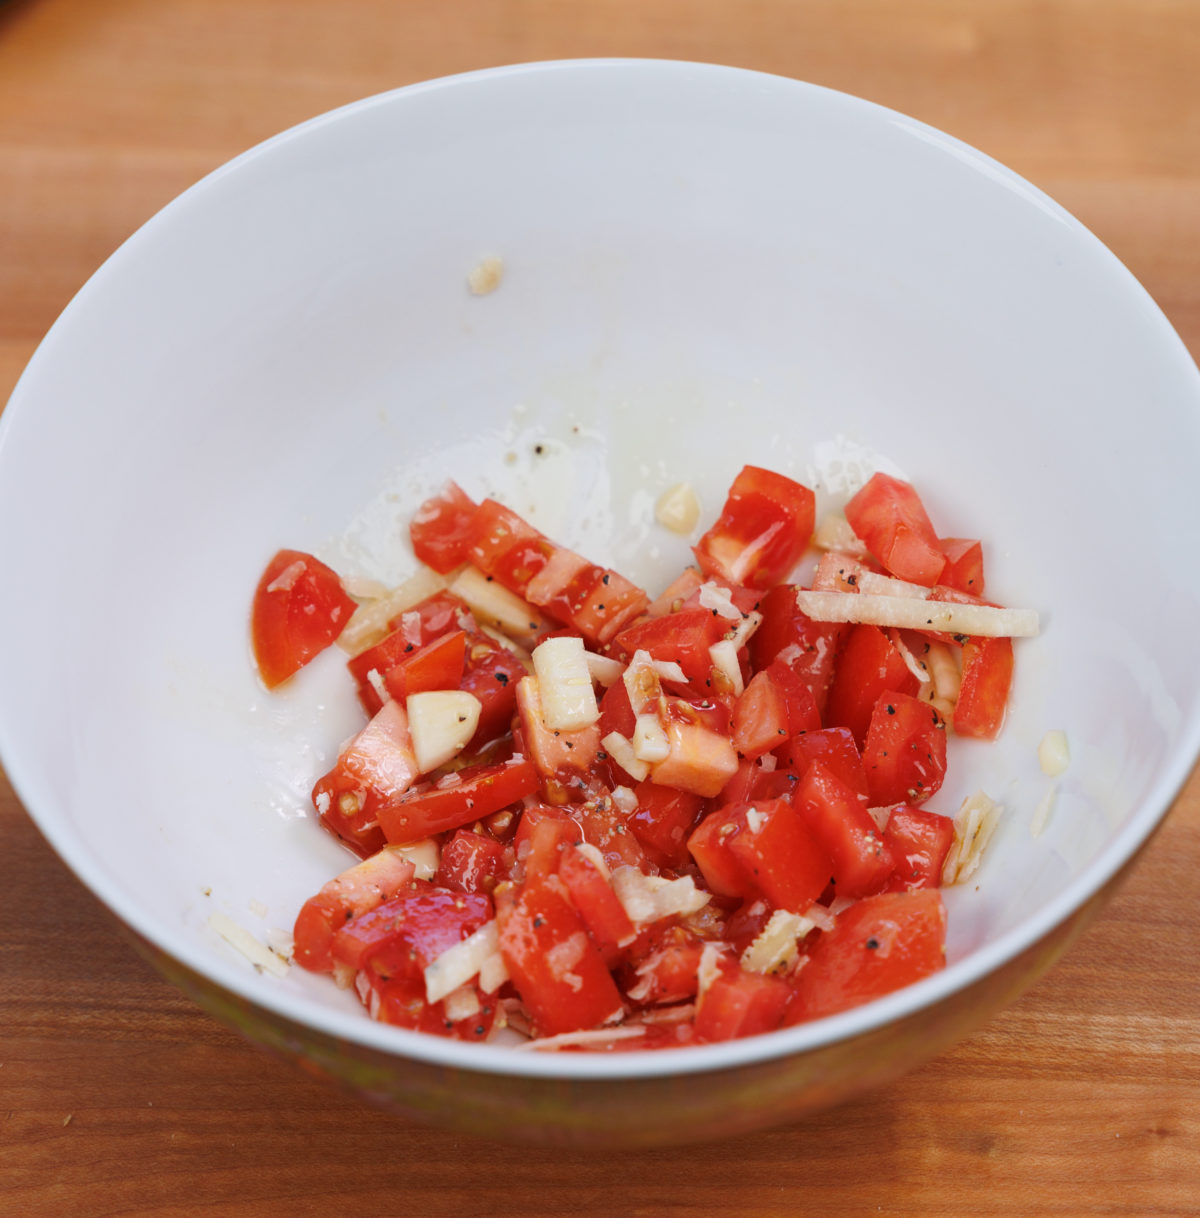 chopped tomatoes, garlic, olive oil, salt and pepper in a small bowl.